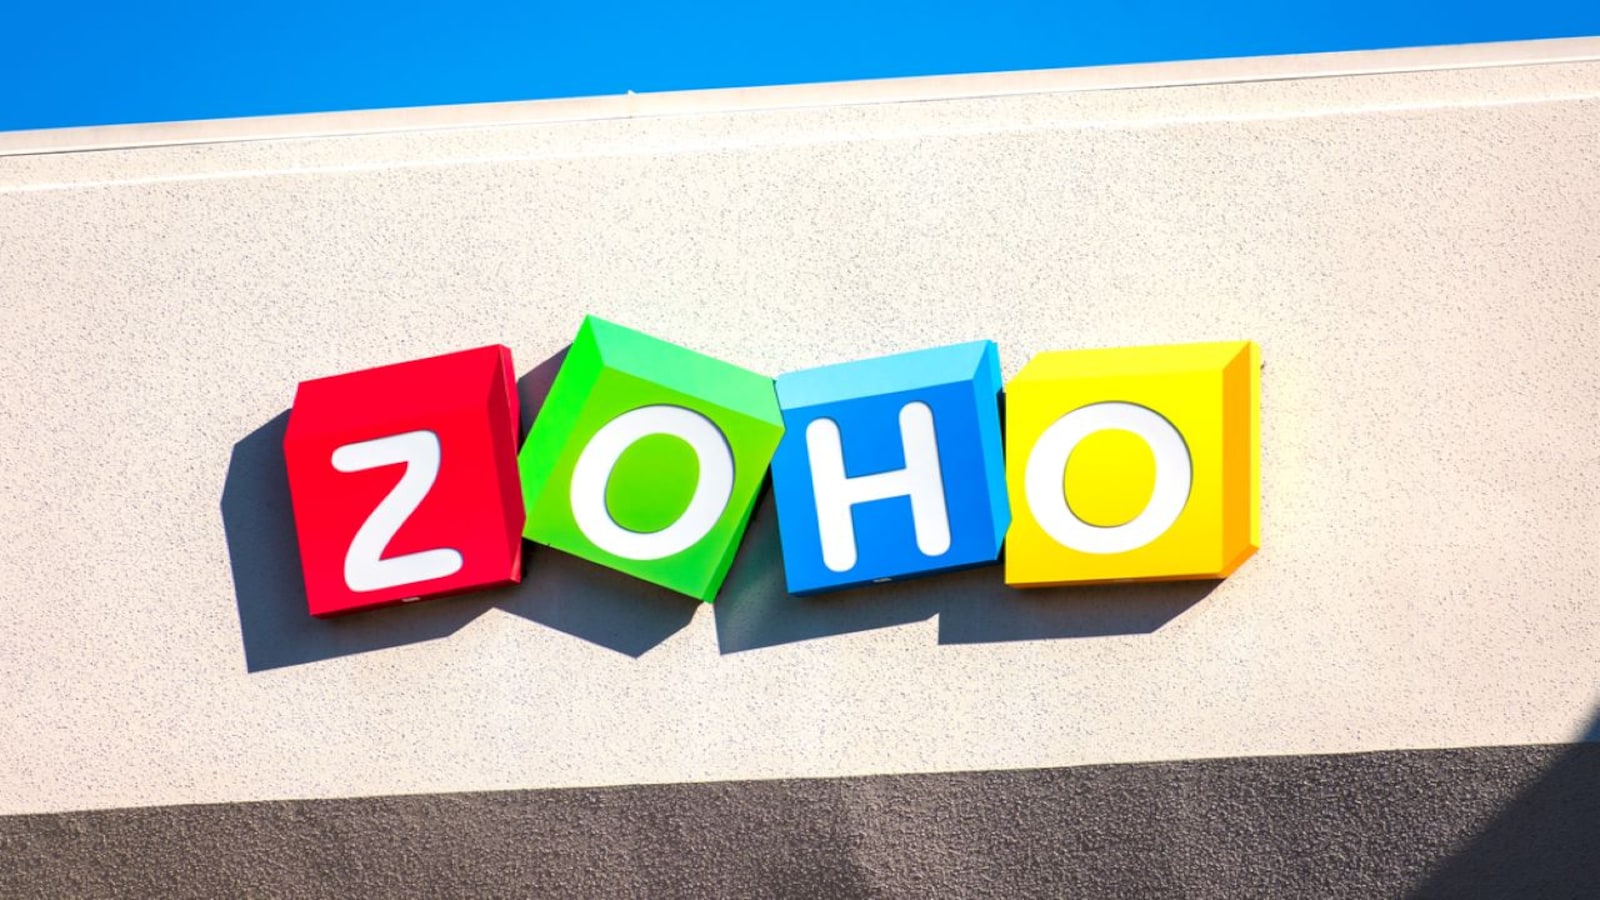 Zoho crosses $1 billion revenue mark but uncertain about growth in current macroeconomic situation